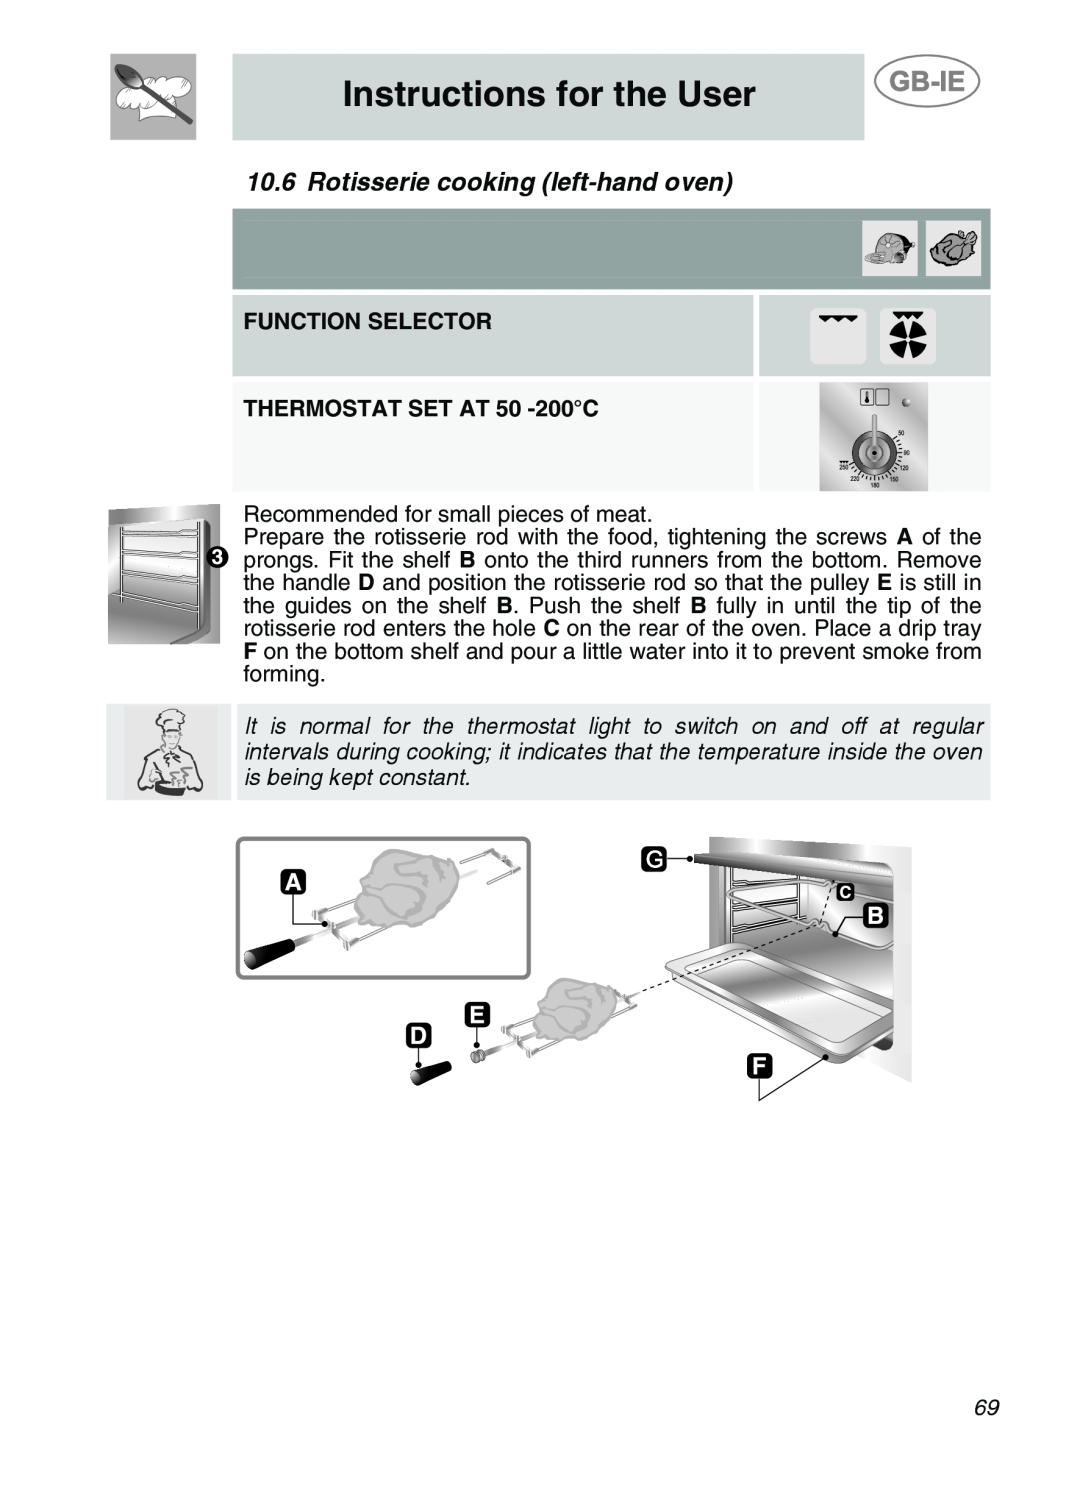 Smeg CS122-6 Rotisserie cooking left-hand oven, FUNCTION SELECTOR THERMOSTAT SET AT 50 -200C, Instructions for the User 